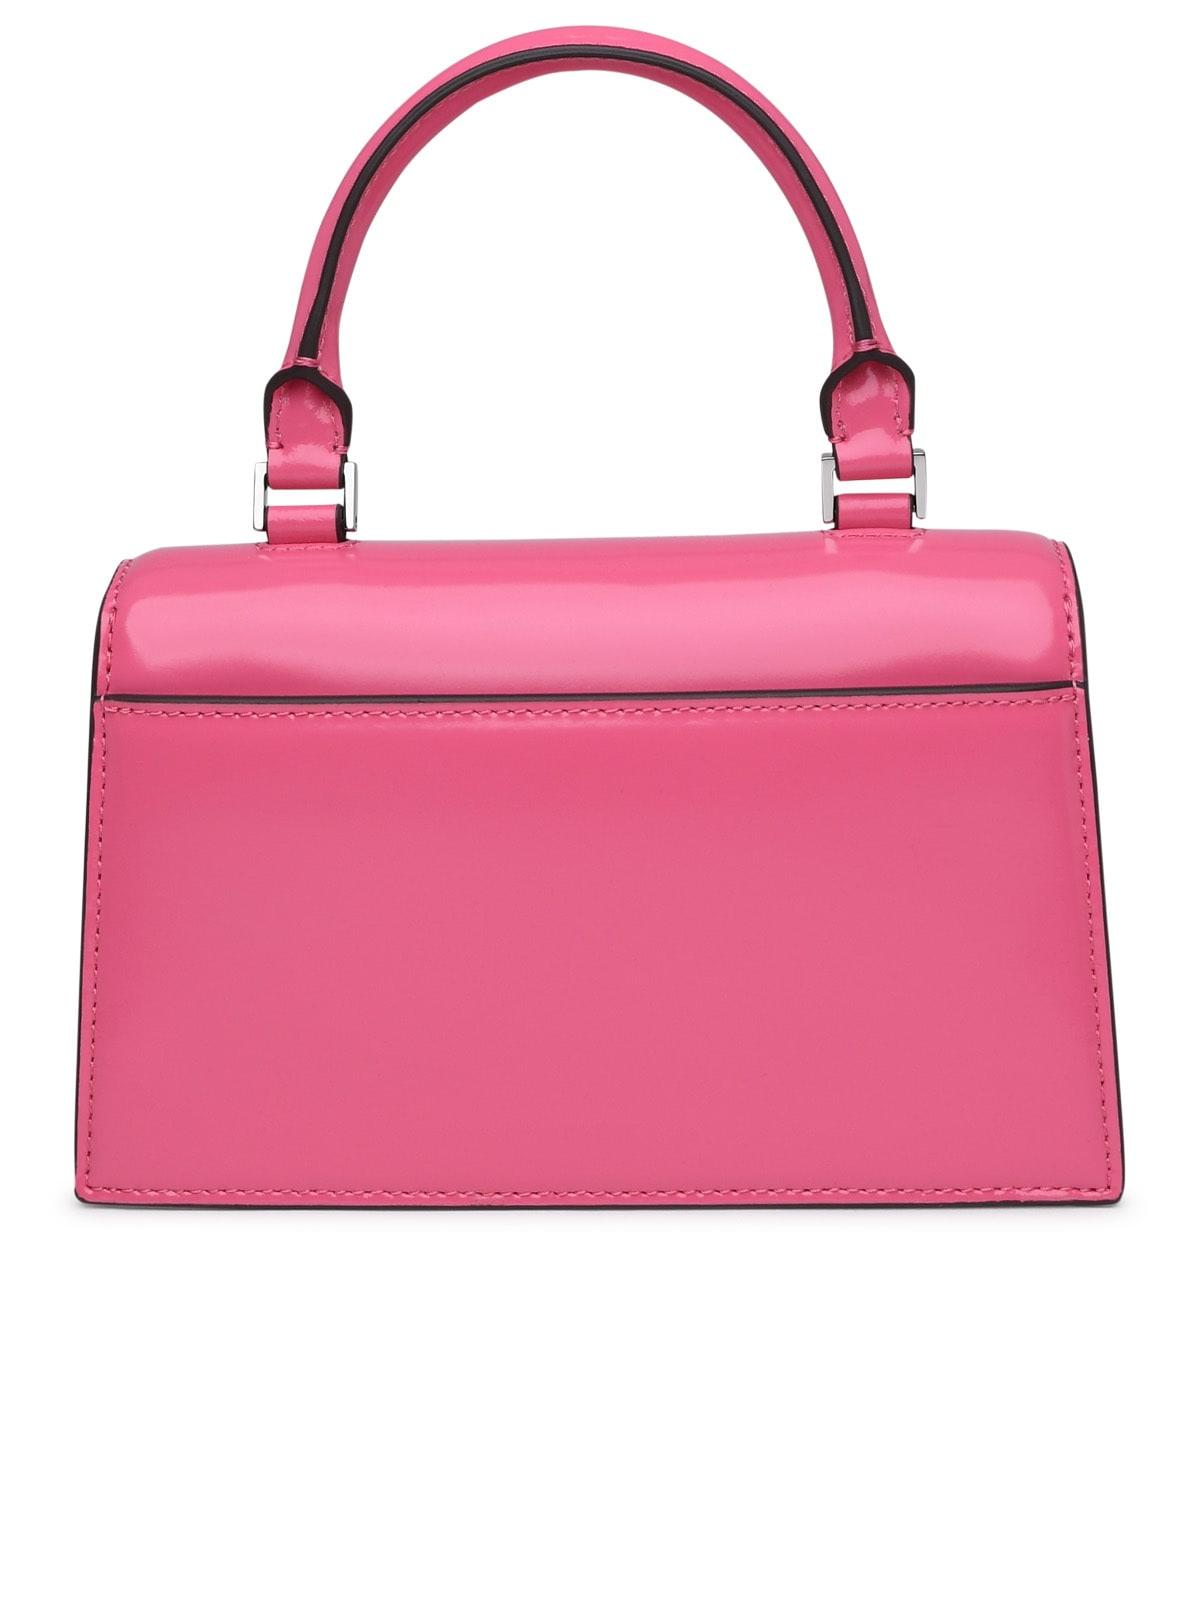 tory burch perry tote pink moon